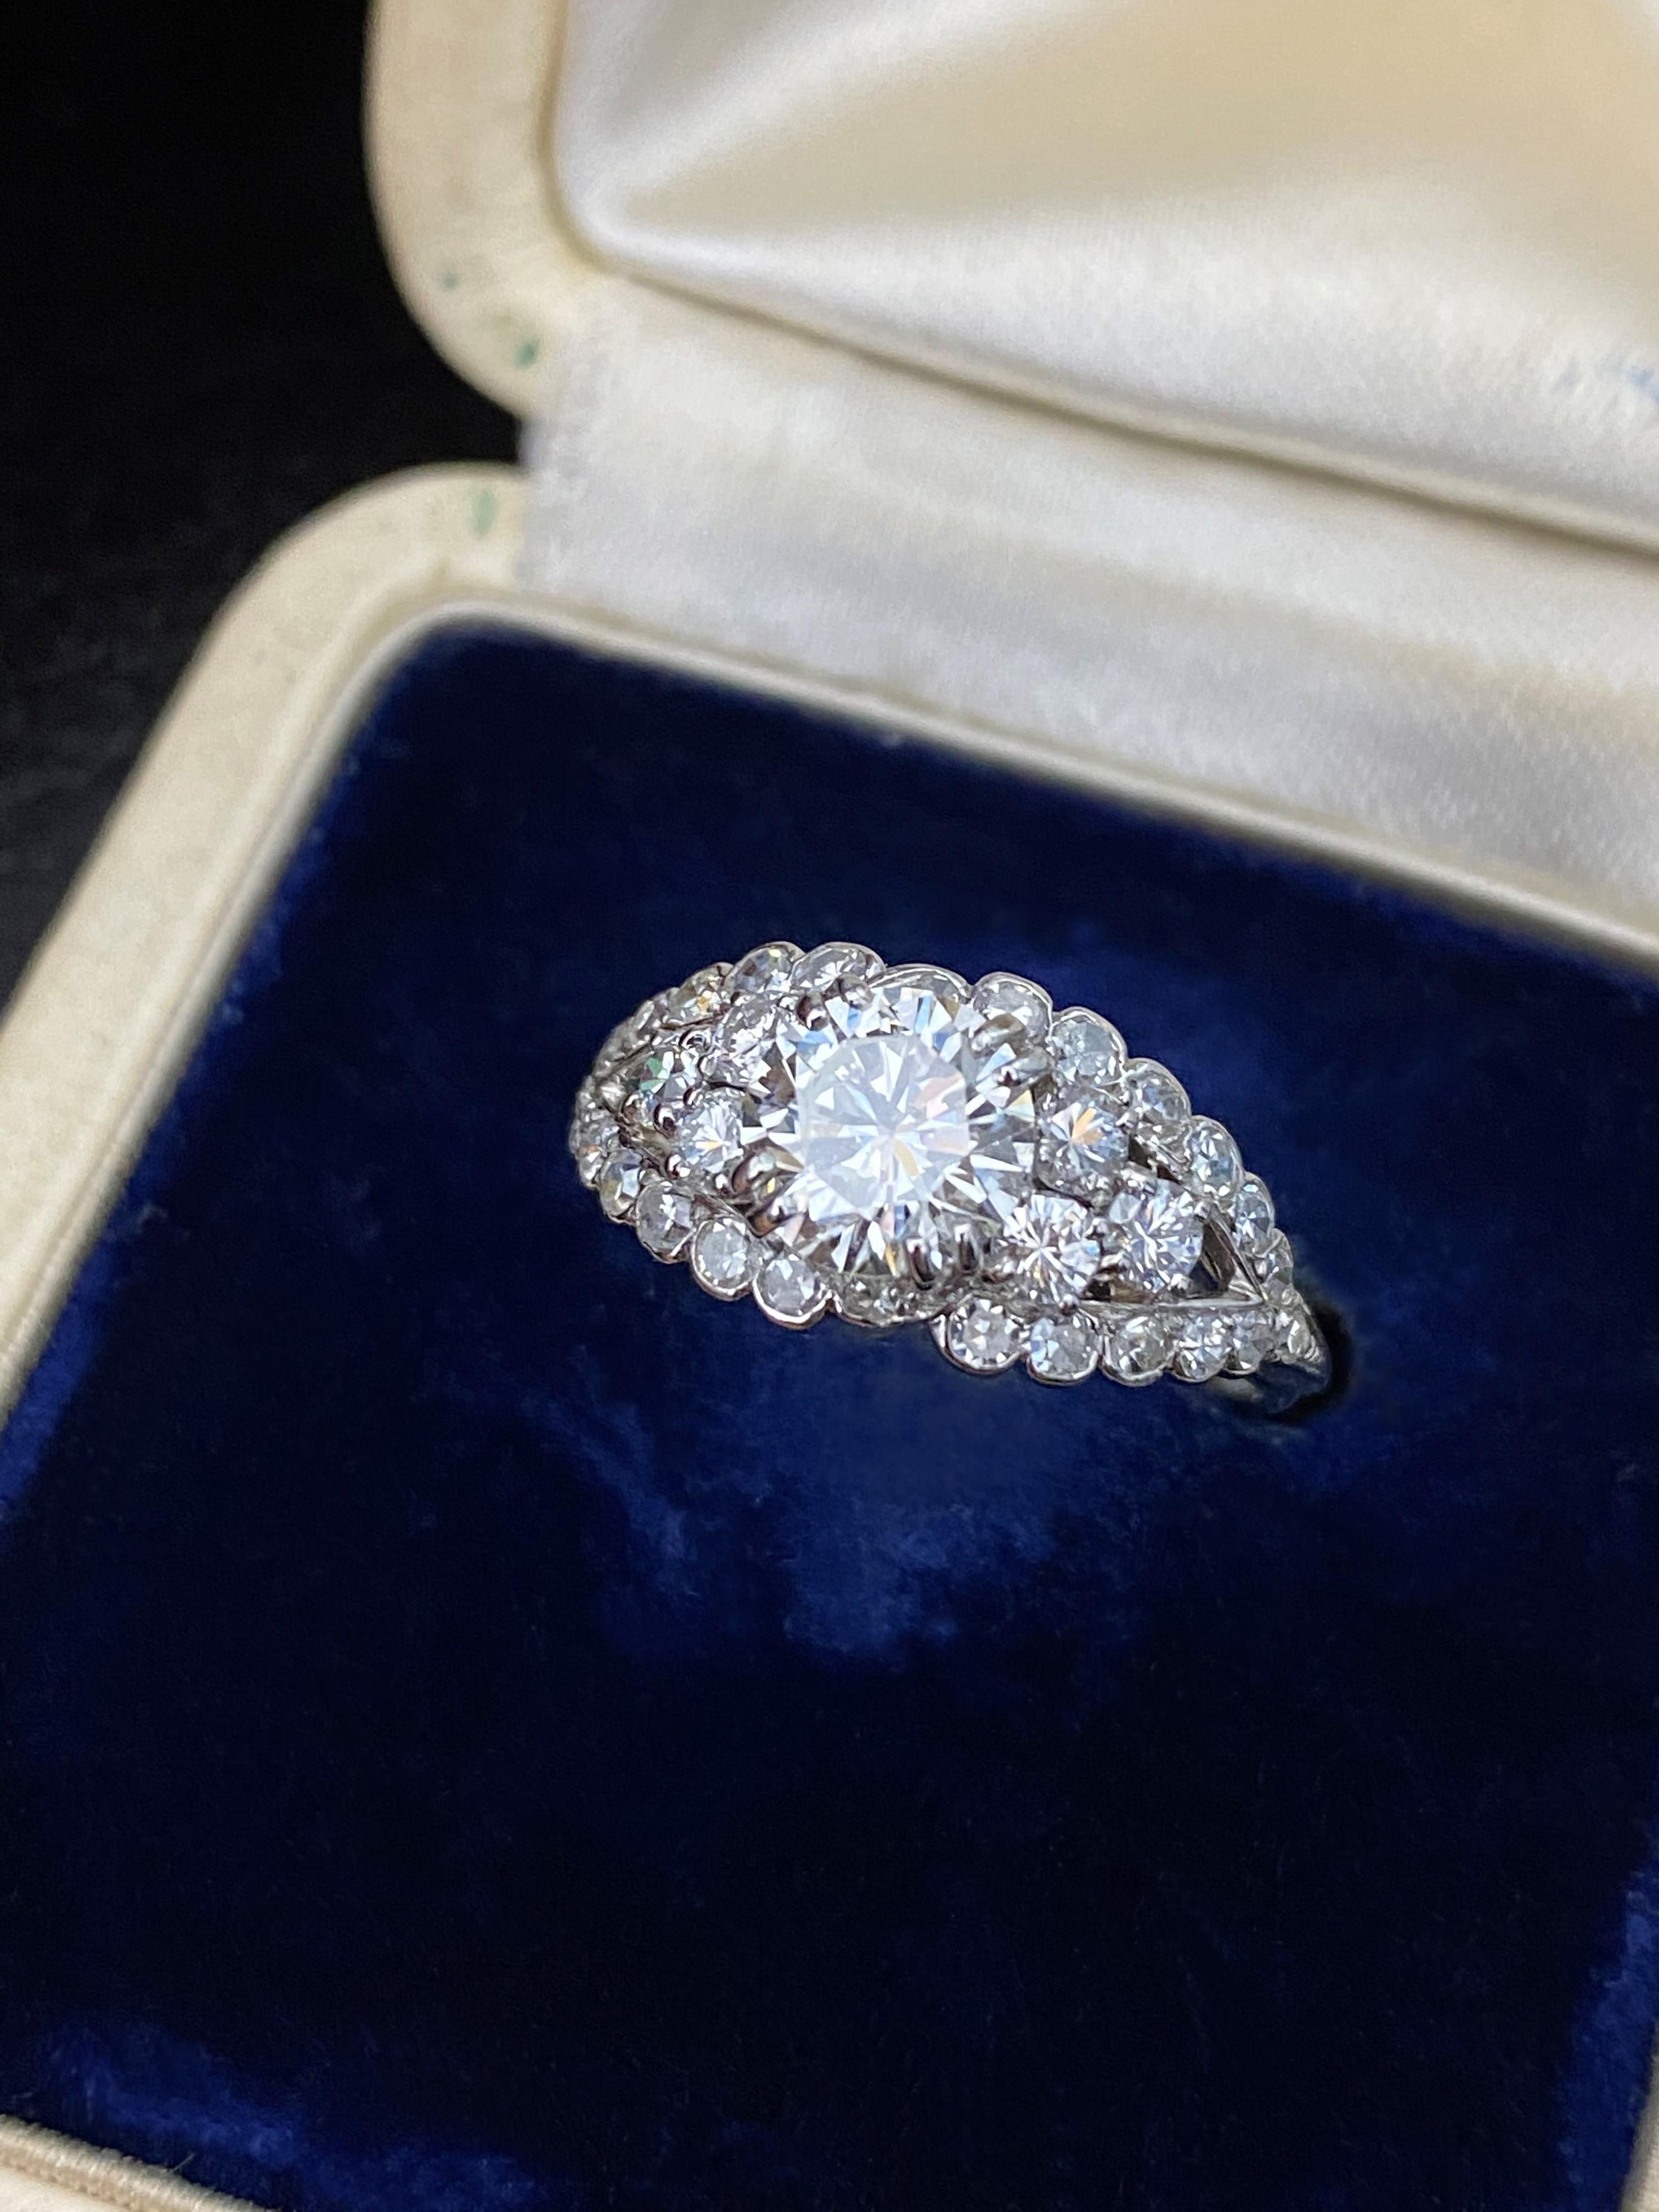 Chaumet Diamond Cluster Ring, French, circa 1935 For Sale 1